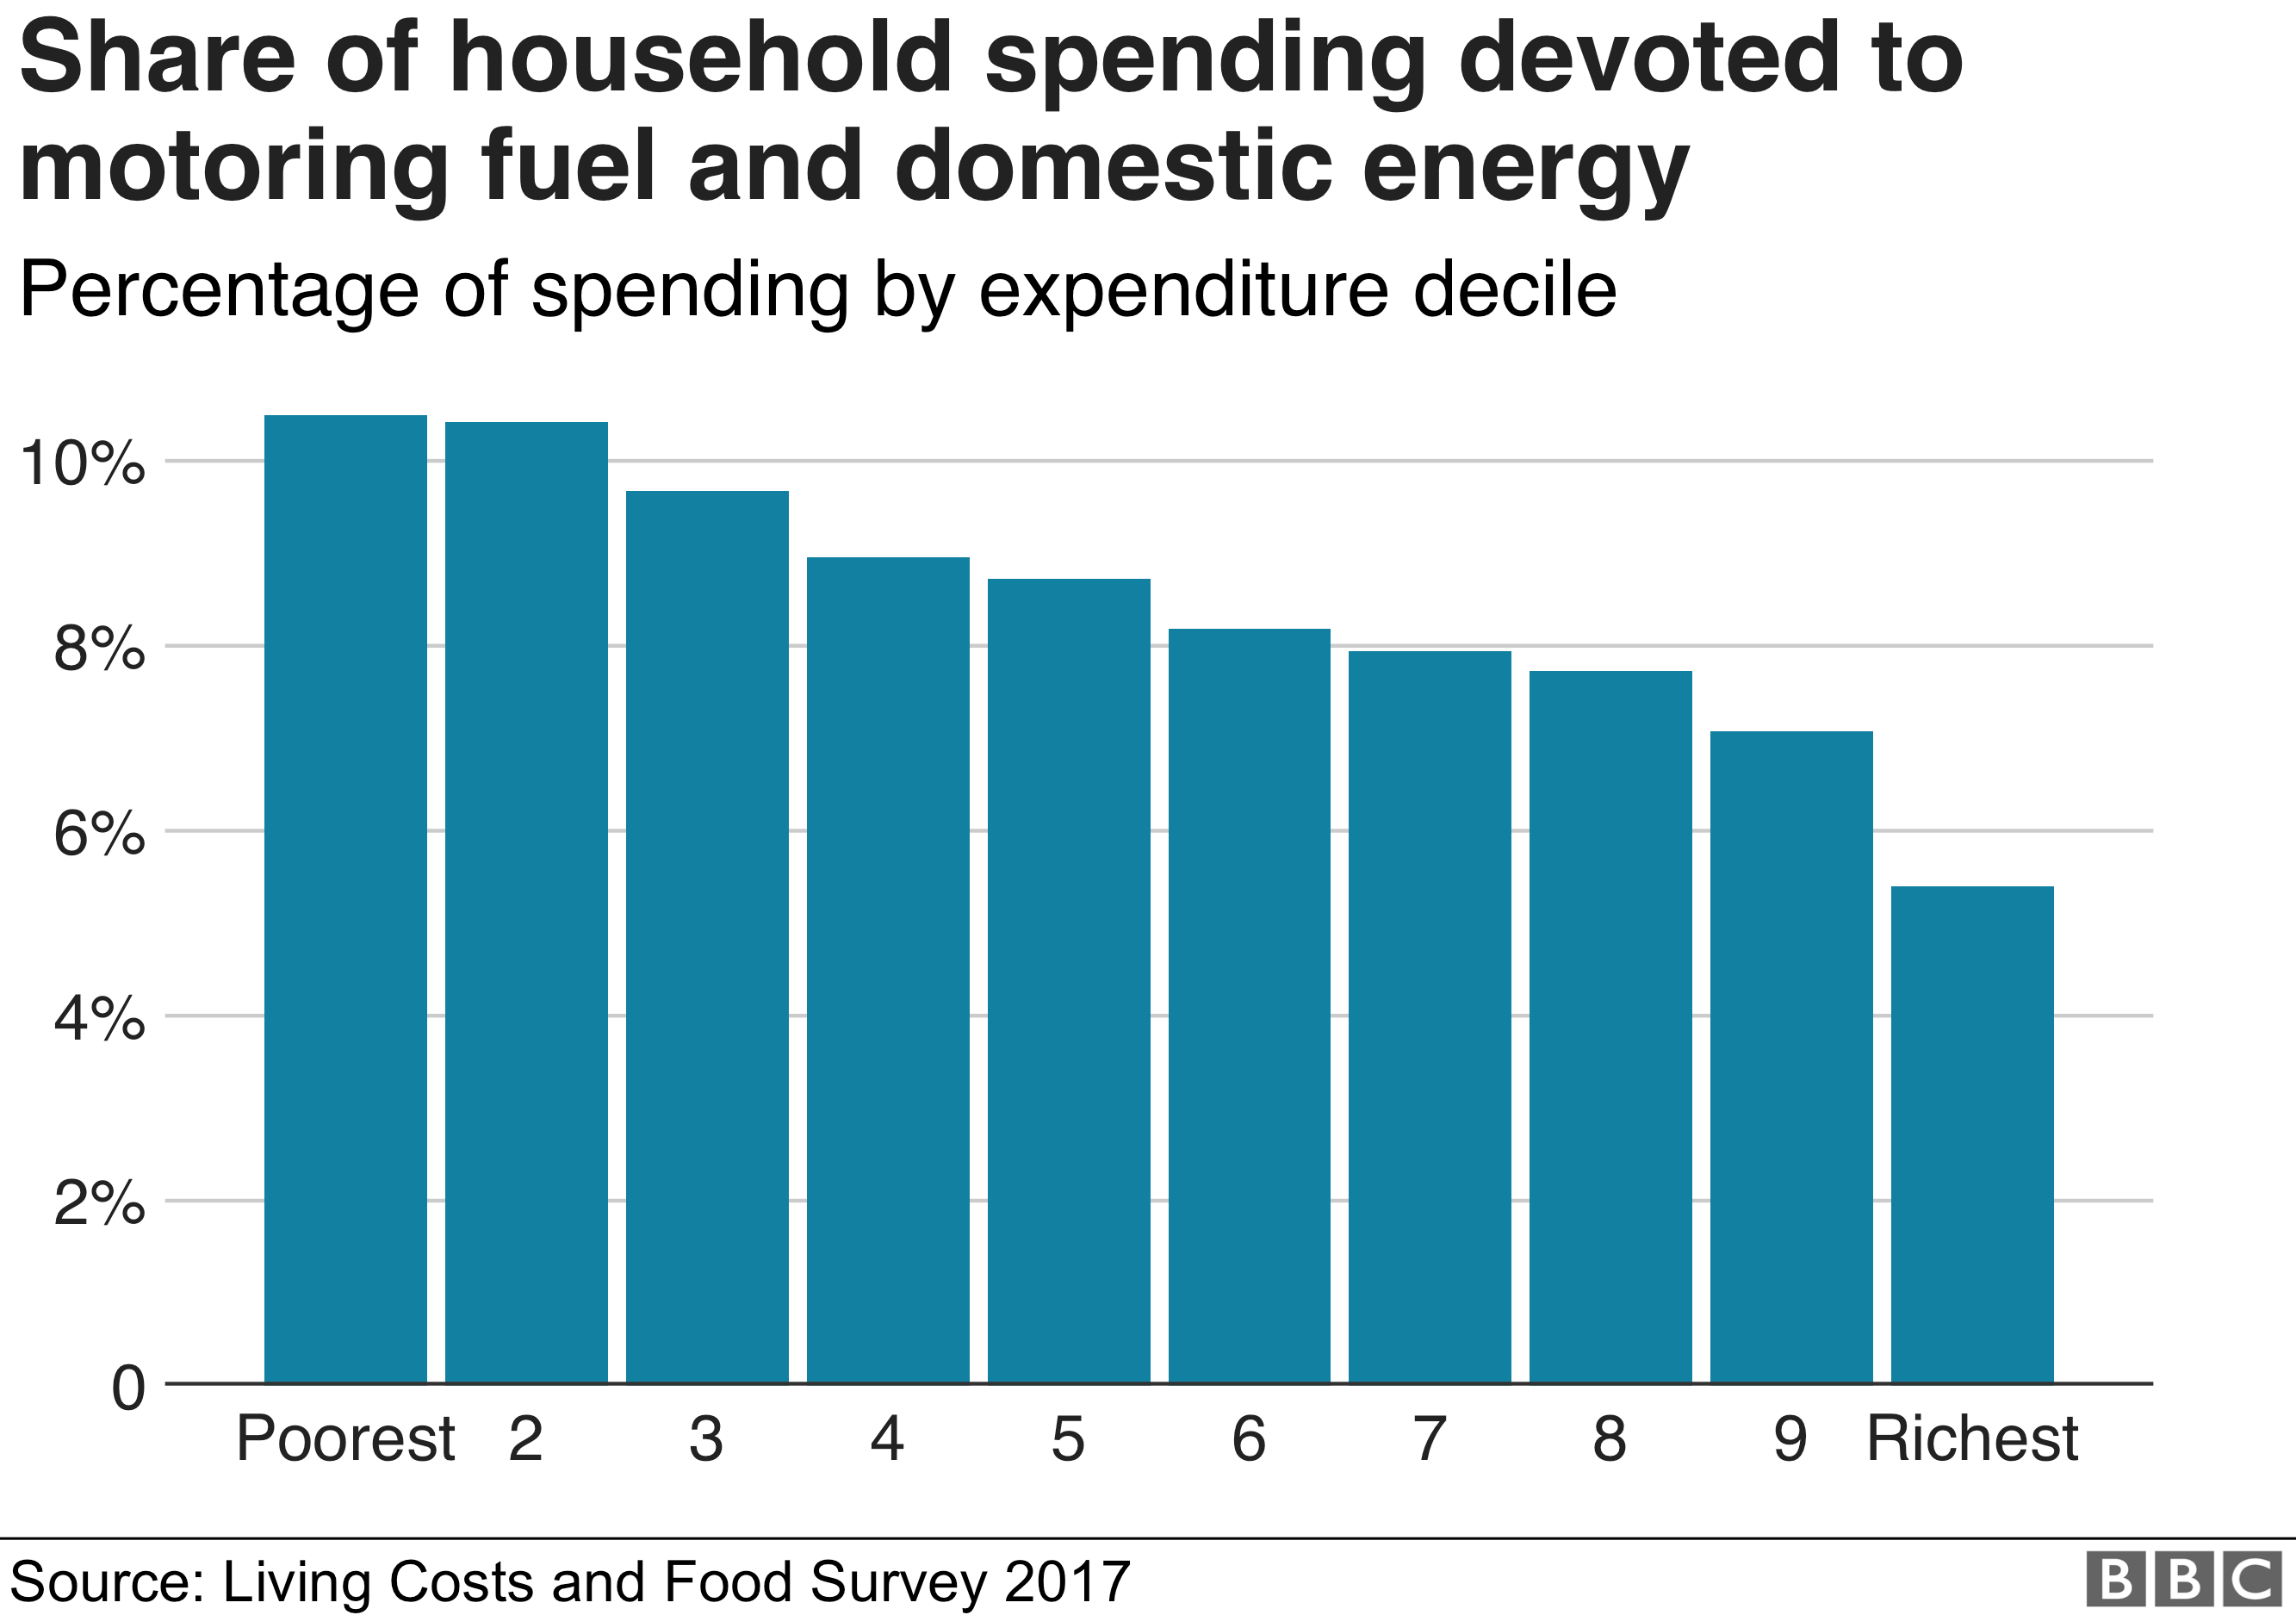 Share of household spending devoted to motoring and domestic fuel